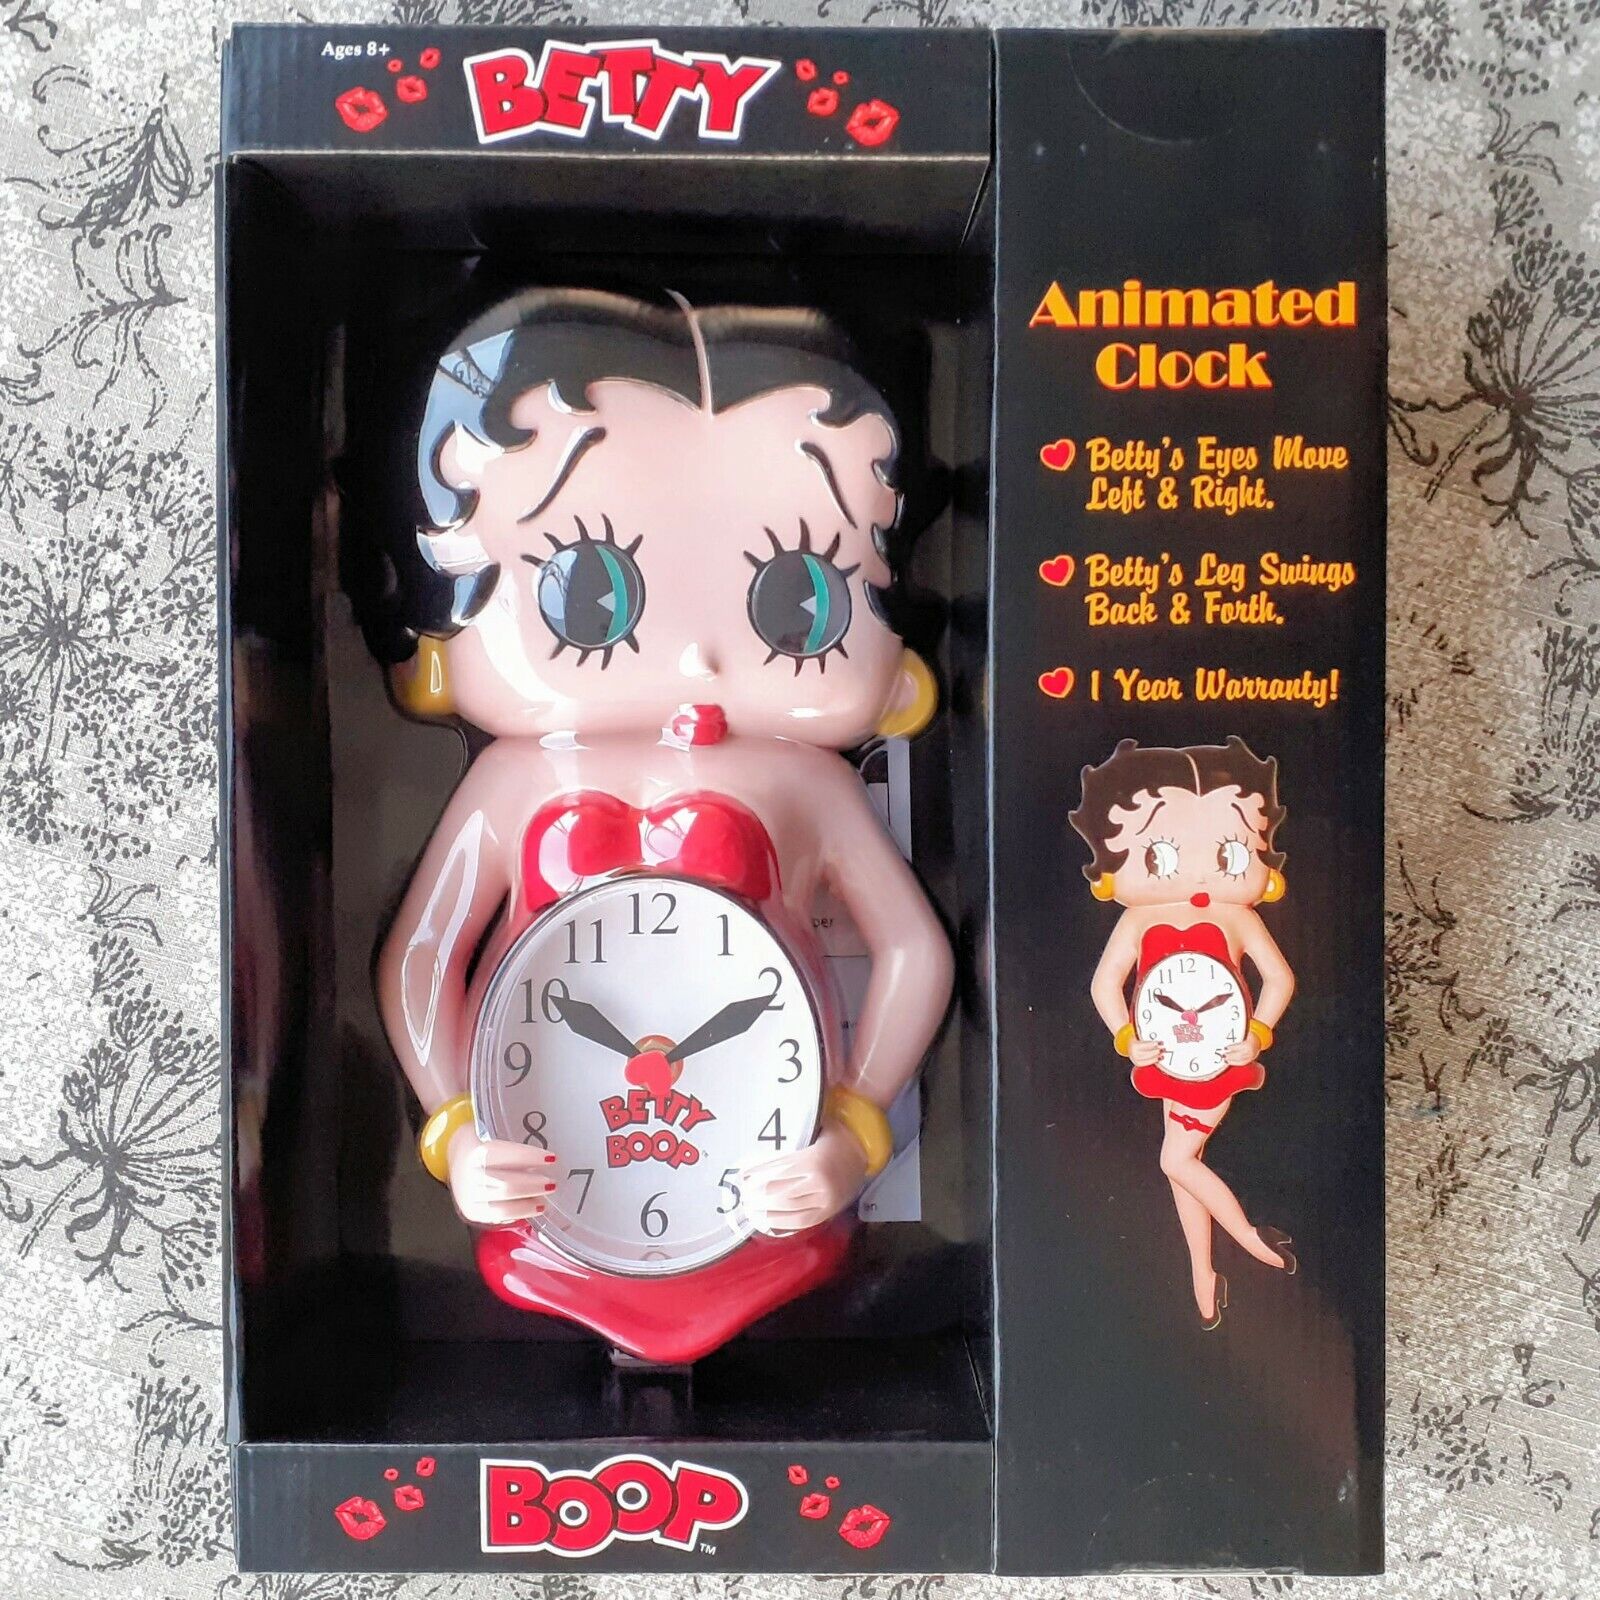 Betty Boop 3-D Motion Animated Clock A NJ Croce Exclusive collectible NIB